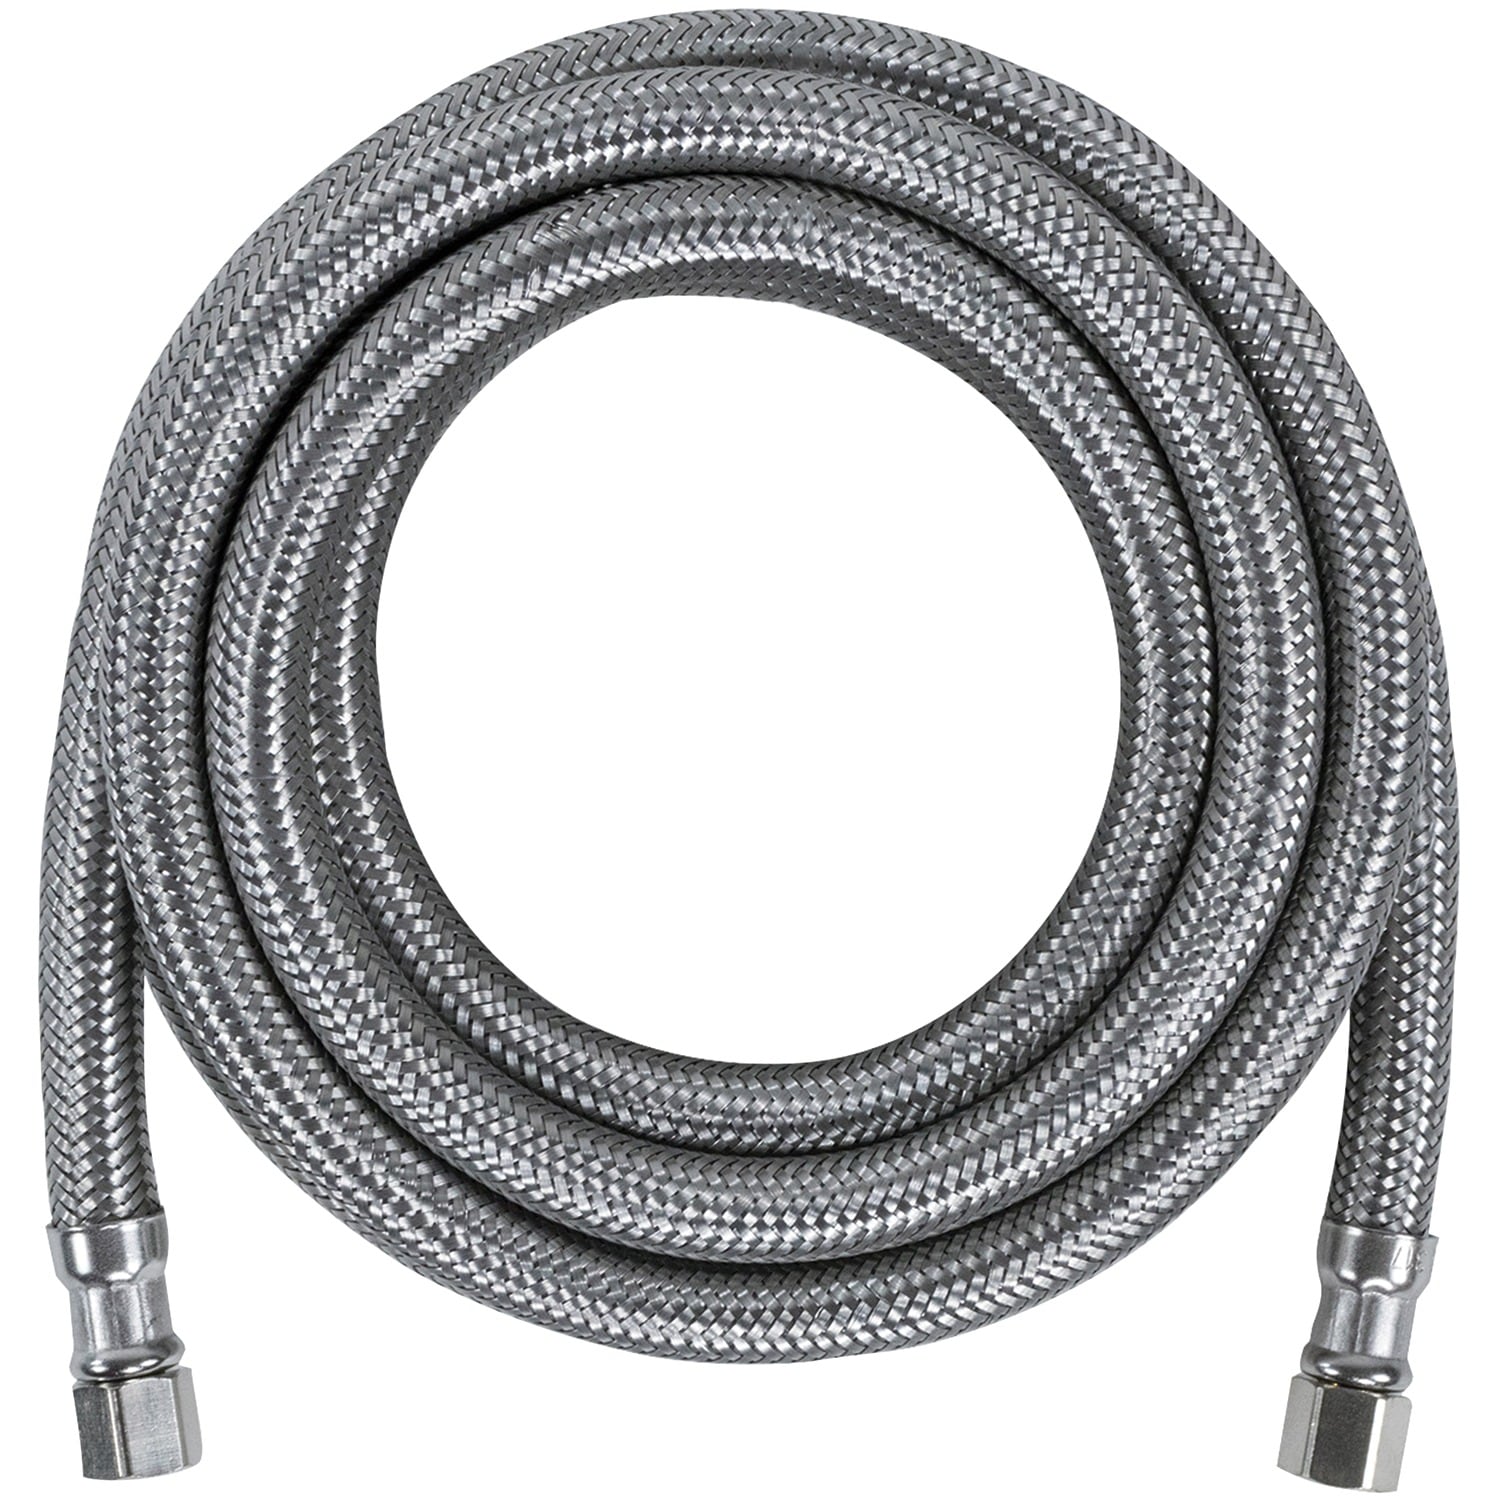 Refrigerator Ice Maker Water Line Kit - 10' Braided Stainless Steel Fridge  Water Line with 1/4 Compression Fittings Pex Tubing Core and Water